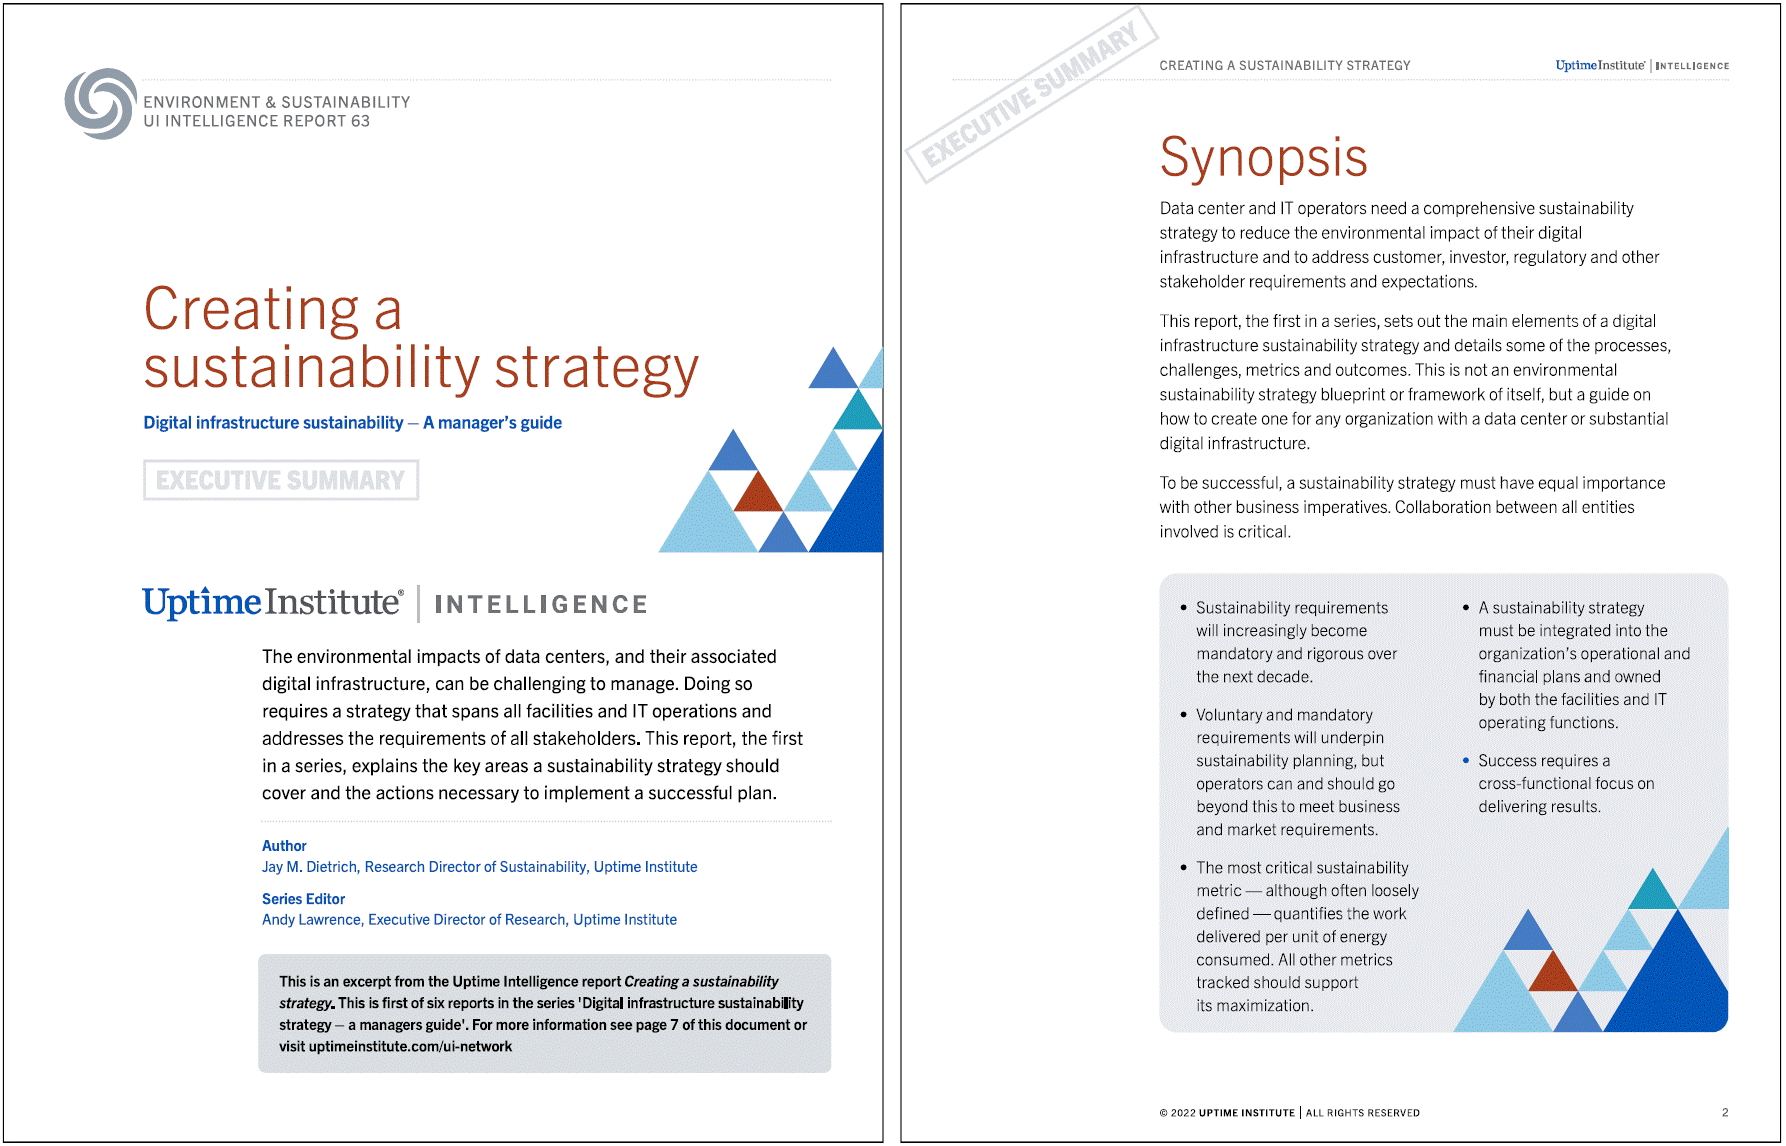 creating-a-sustainability-strategy-executive-summary_preview.gif